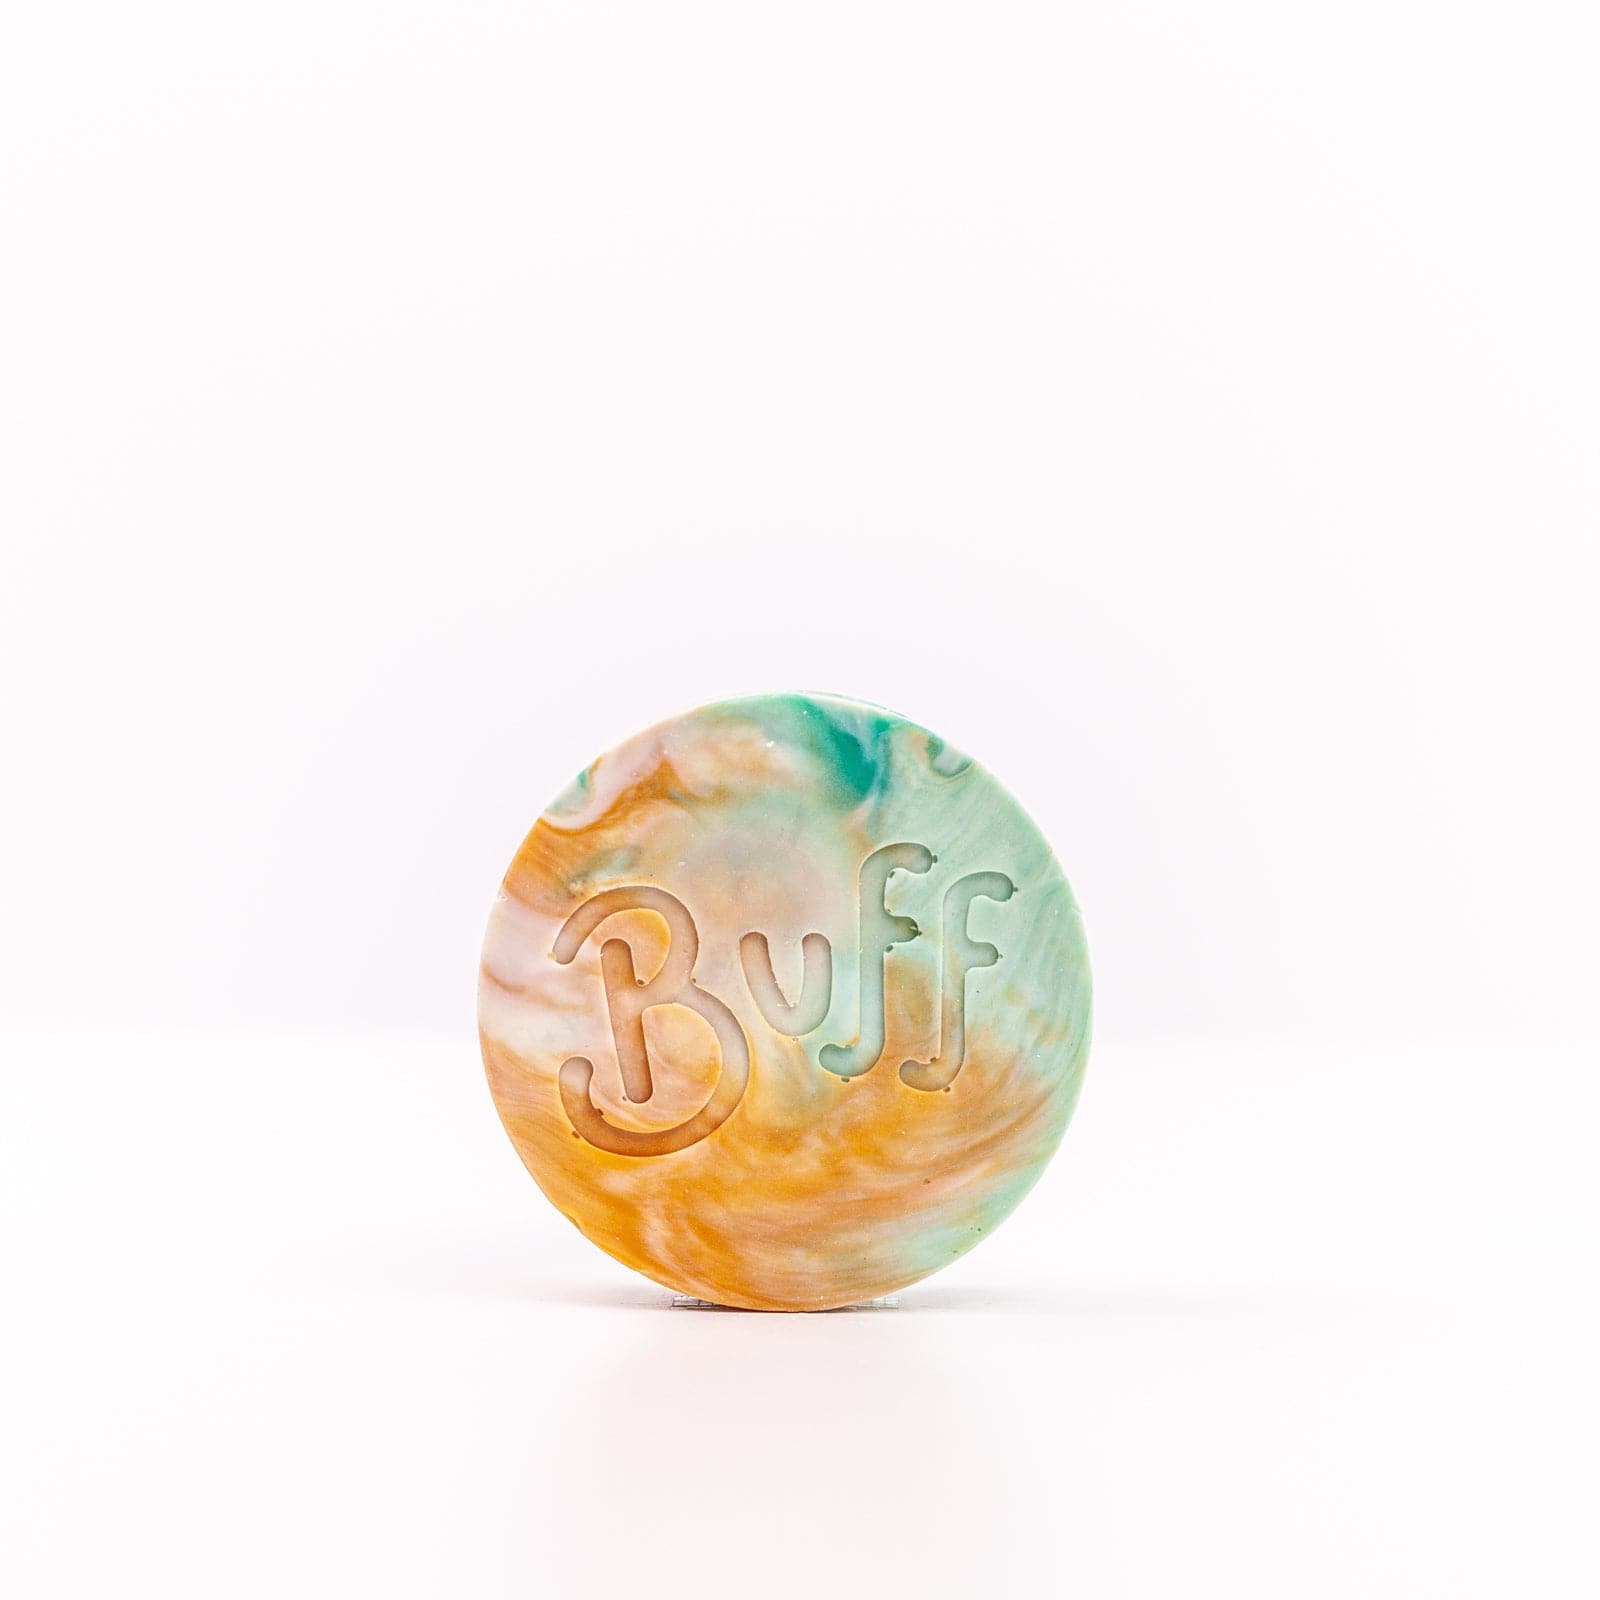 teal, white, and orange Narcissist Shave Bar with "Buff" engraved in bar